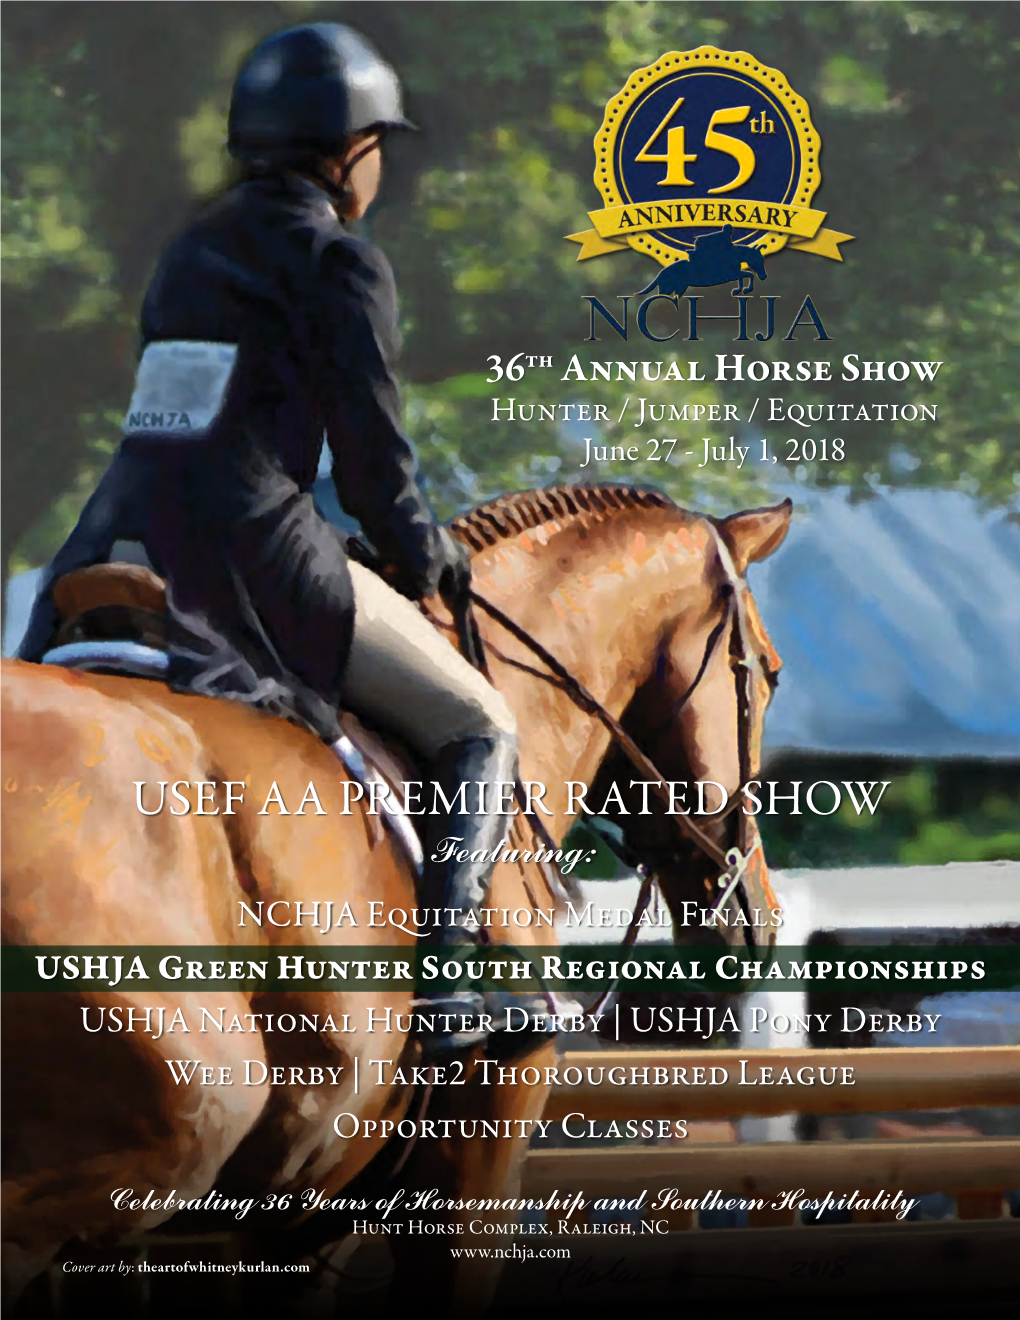 Usef Aa Premier Rated Show